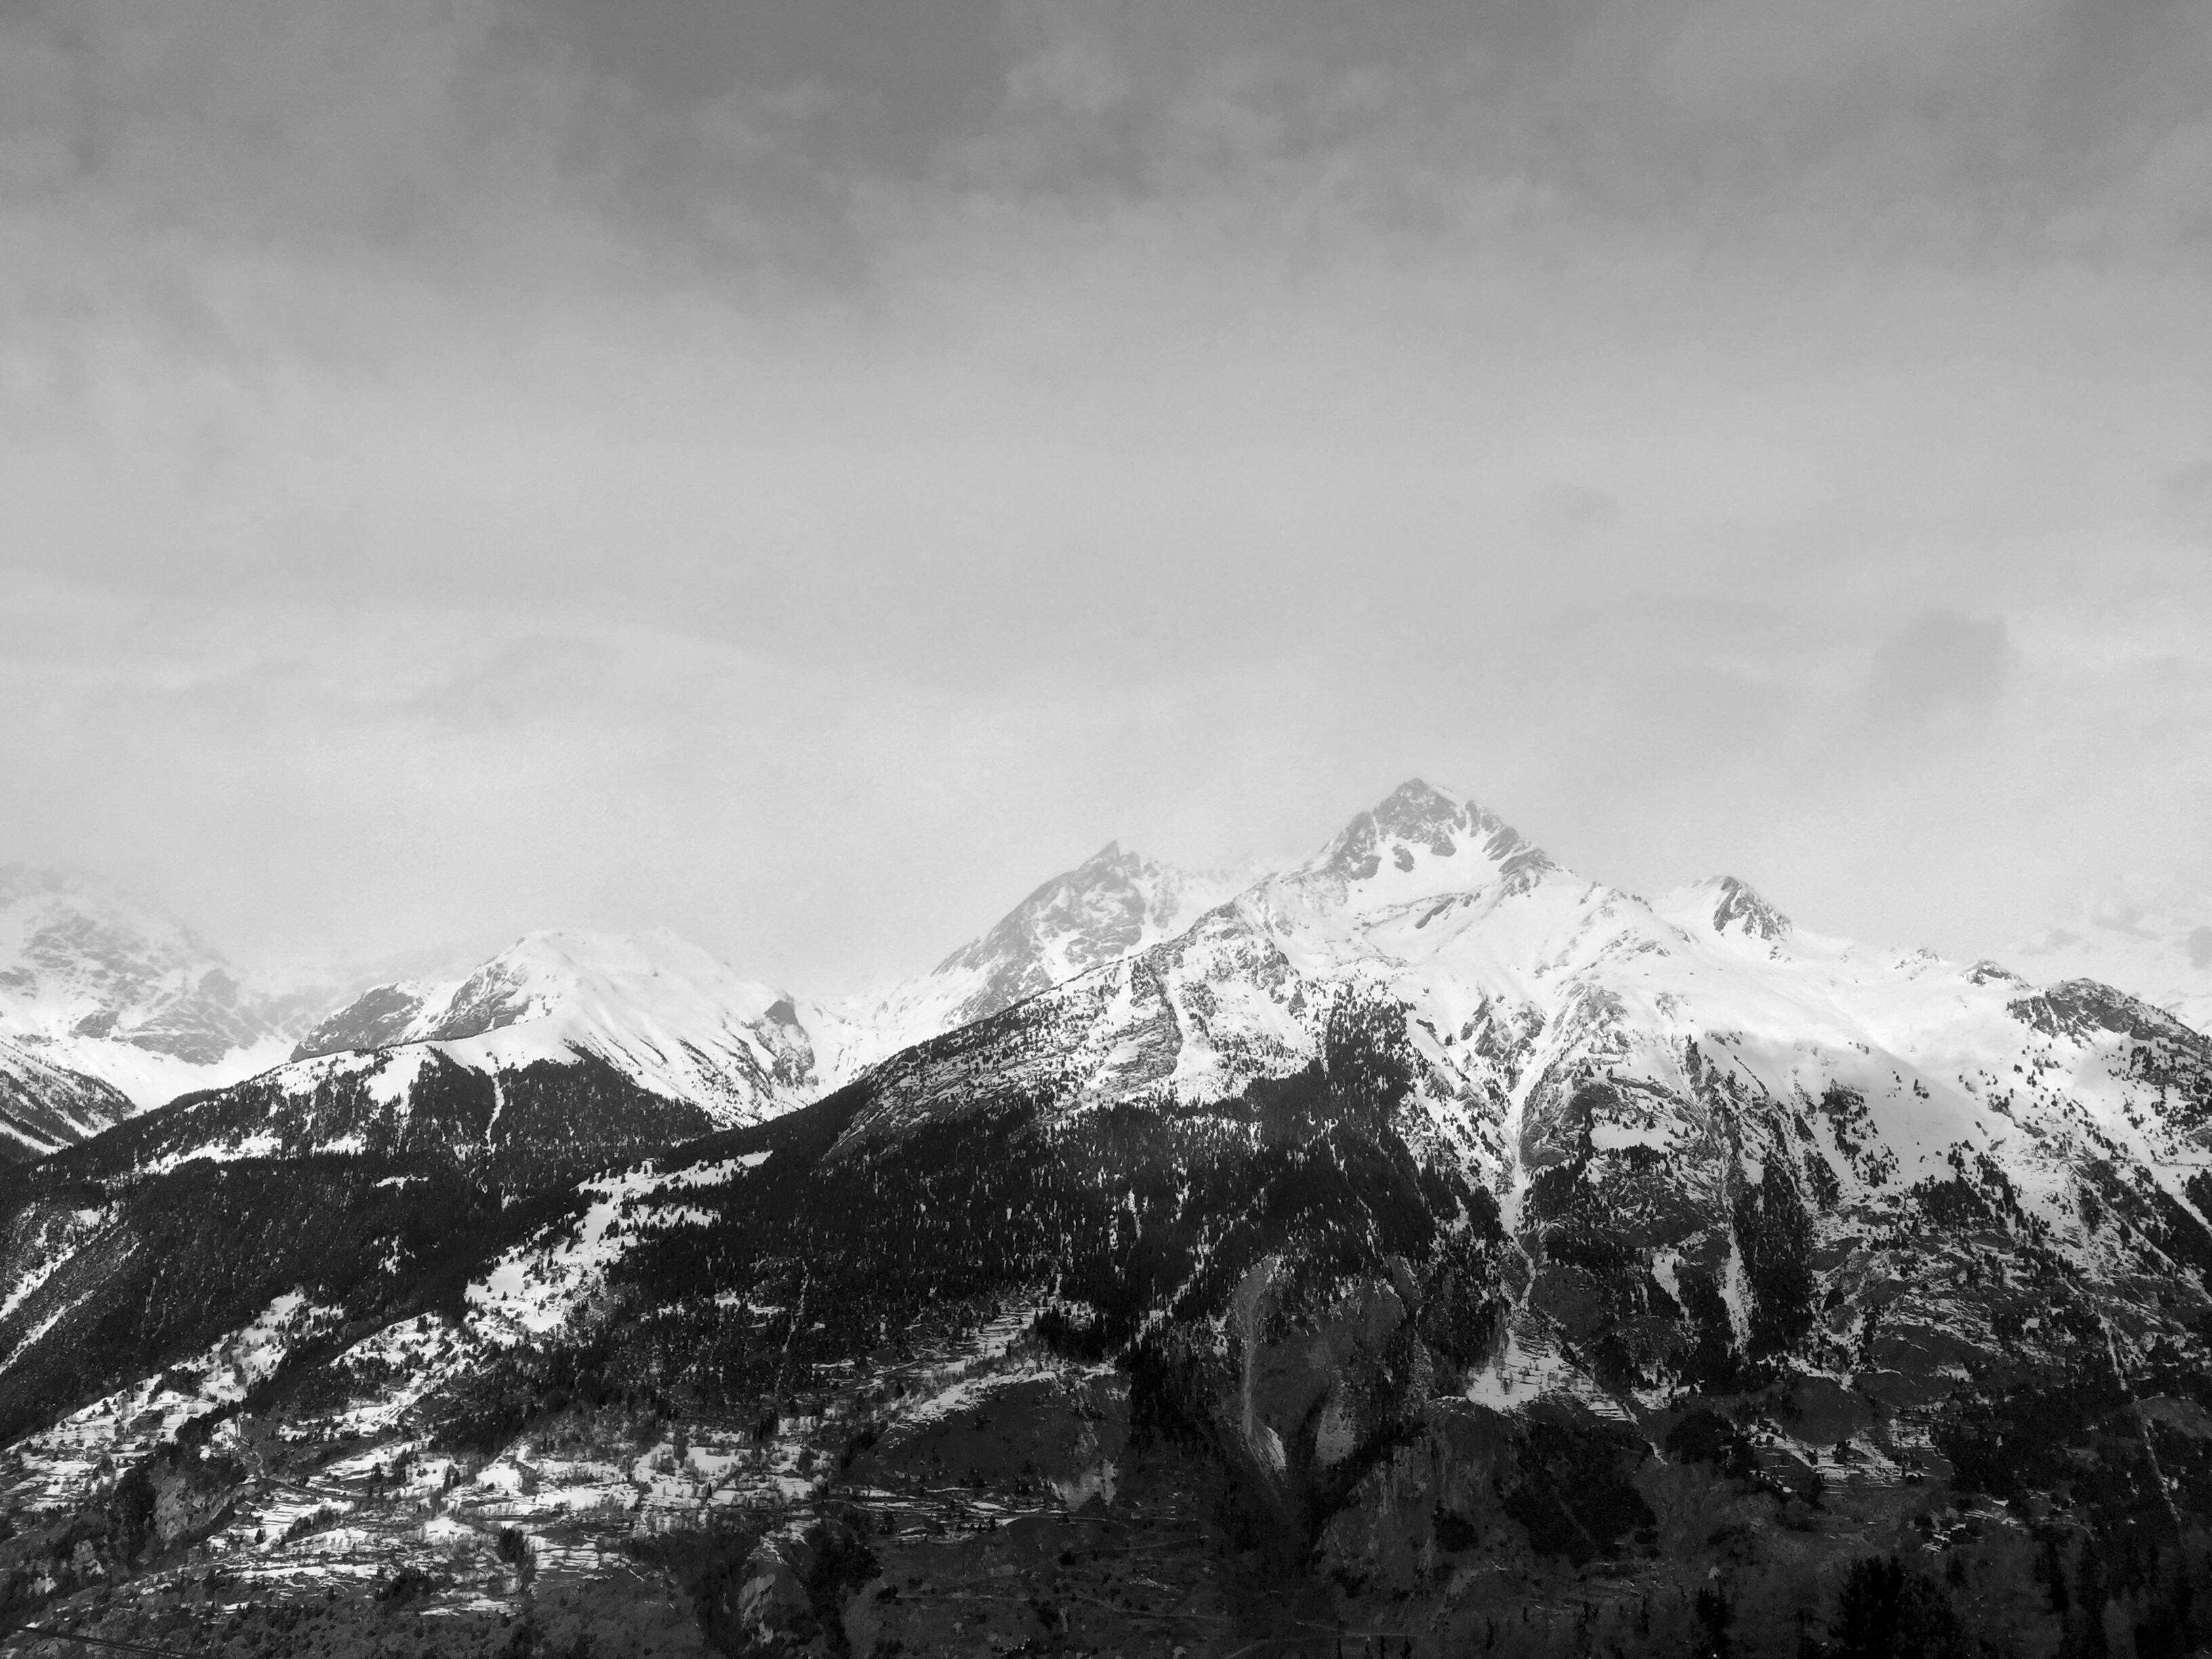 black and white, cold, landscape, mountain, outdoors, rocky